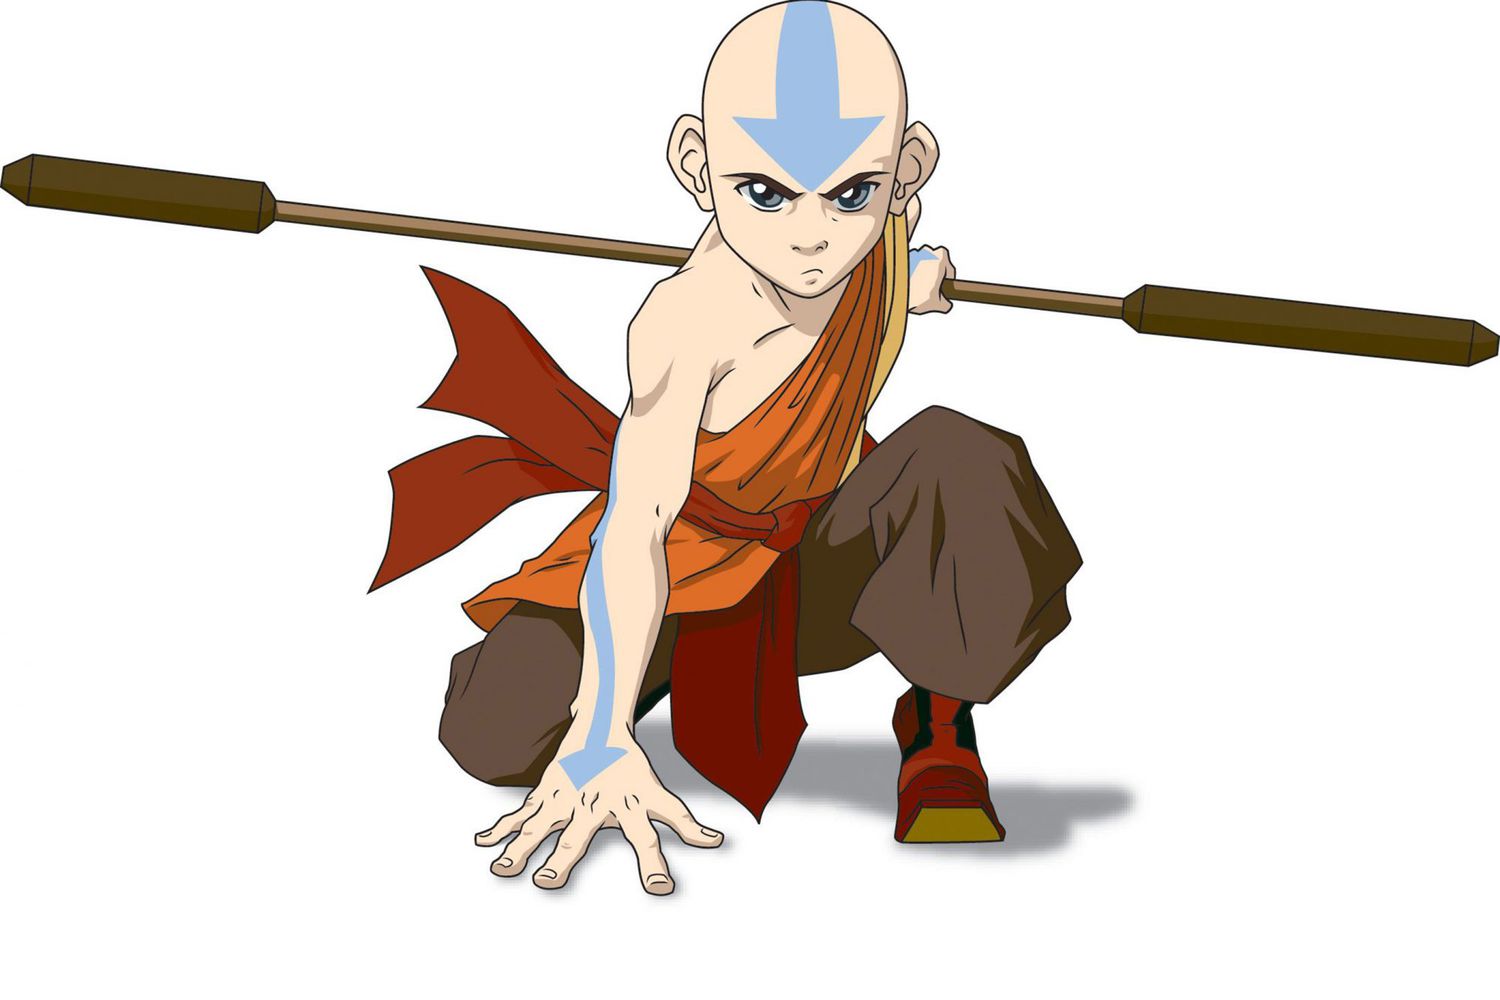 Avatar The Last Airbender is getting an animated movie 